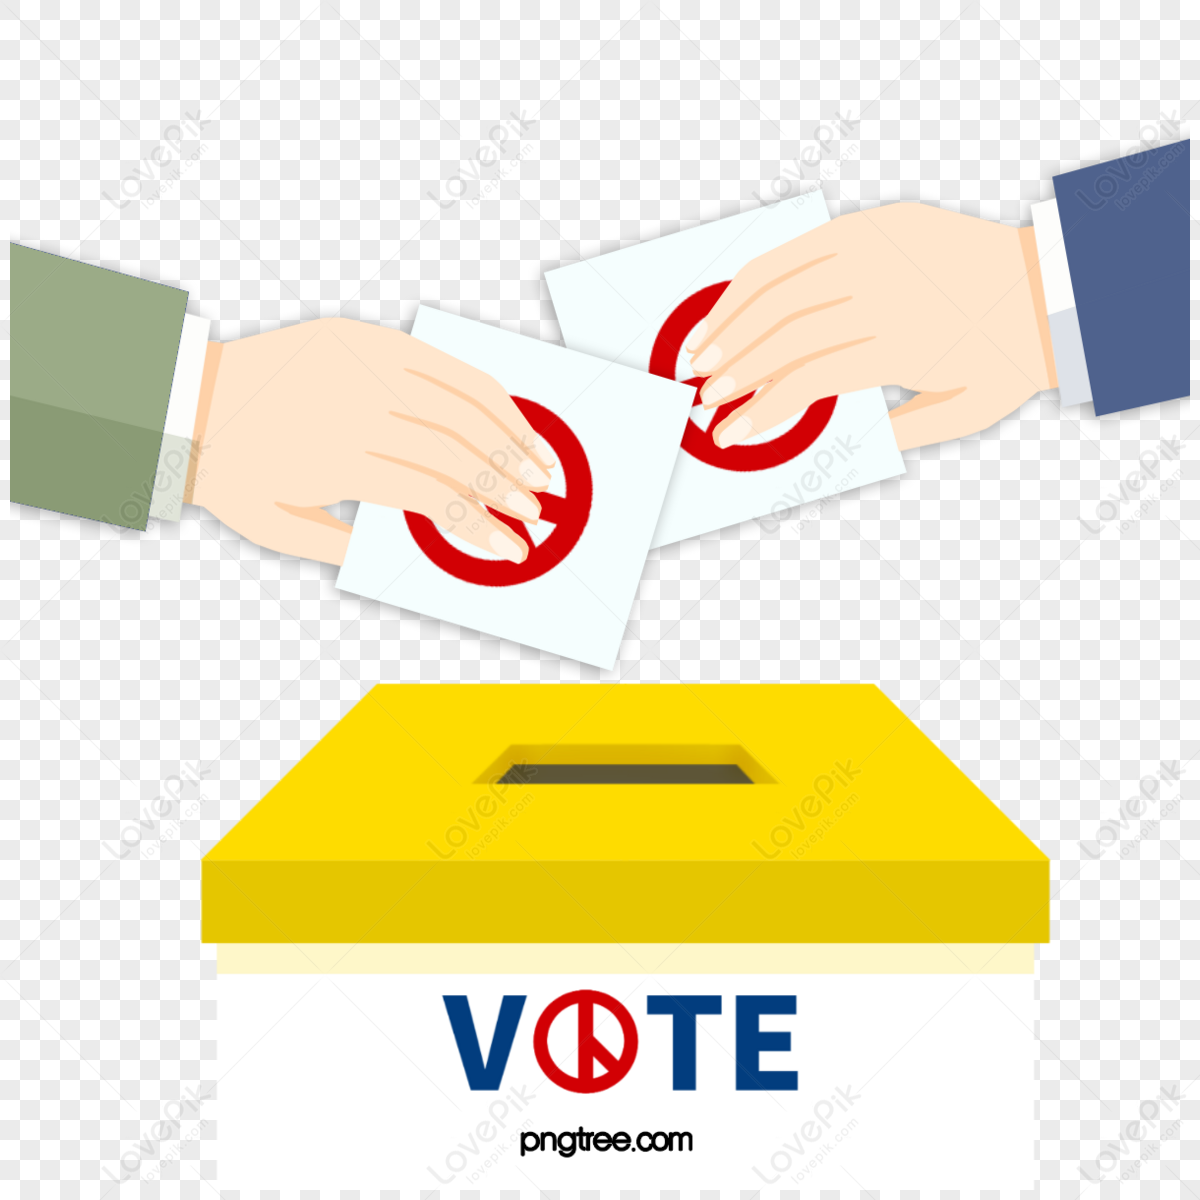 South Korea election ballot box,tickets,hand,ticket png transparent image